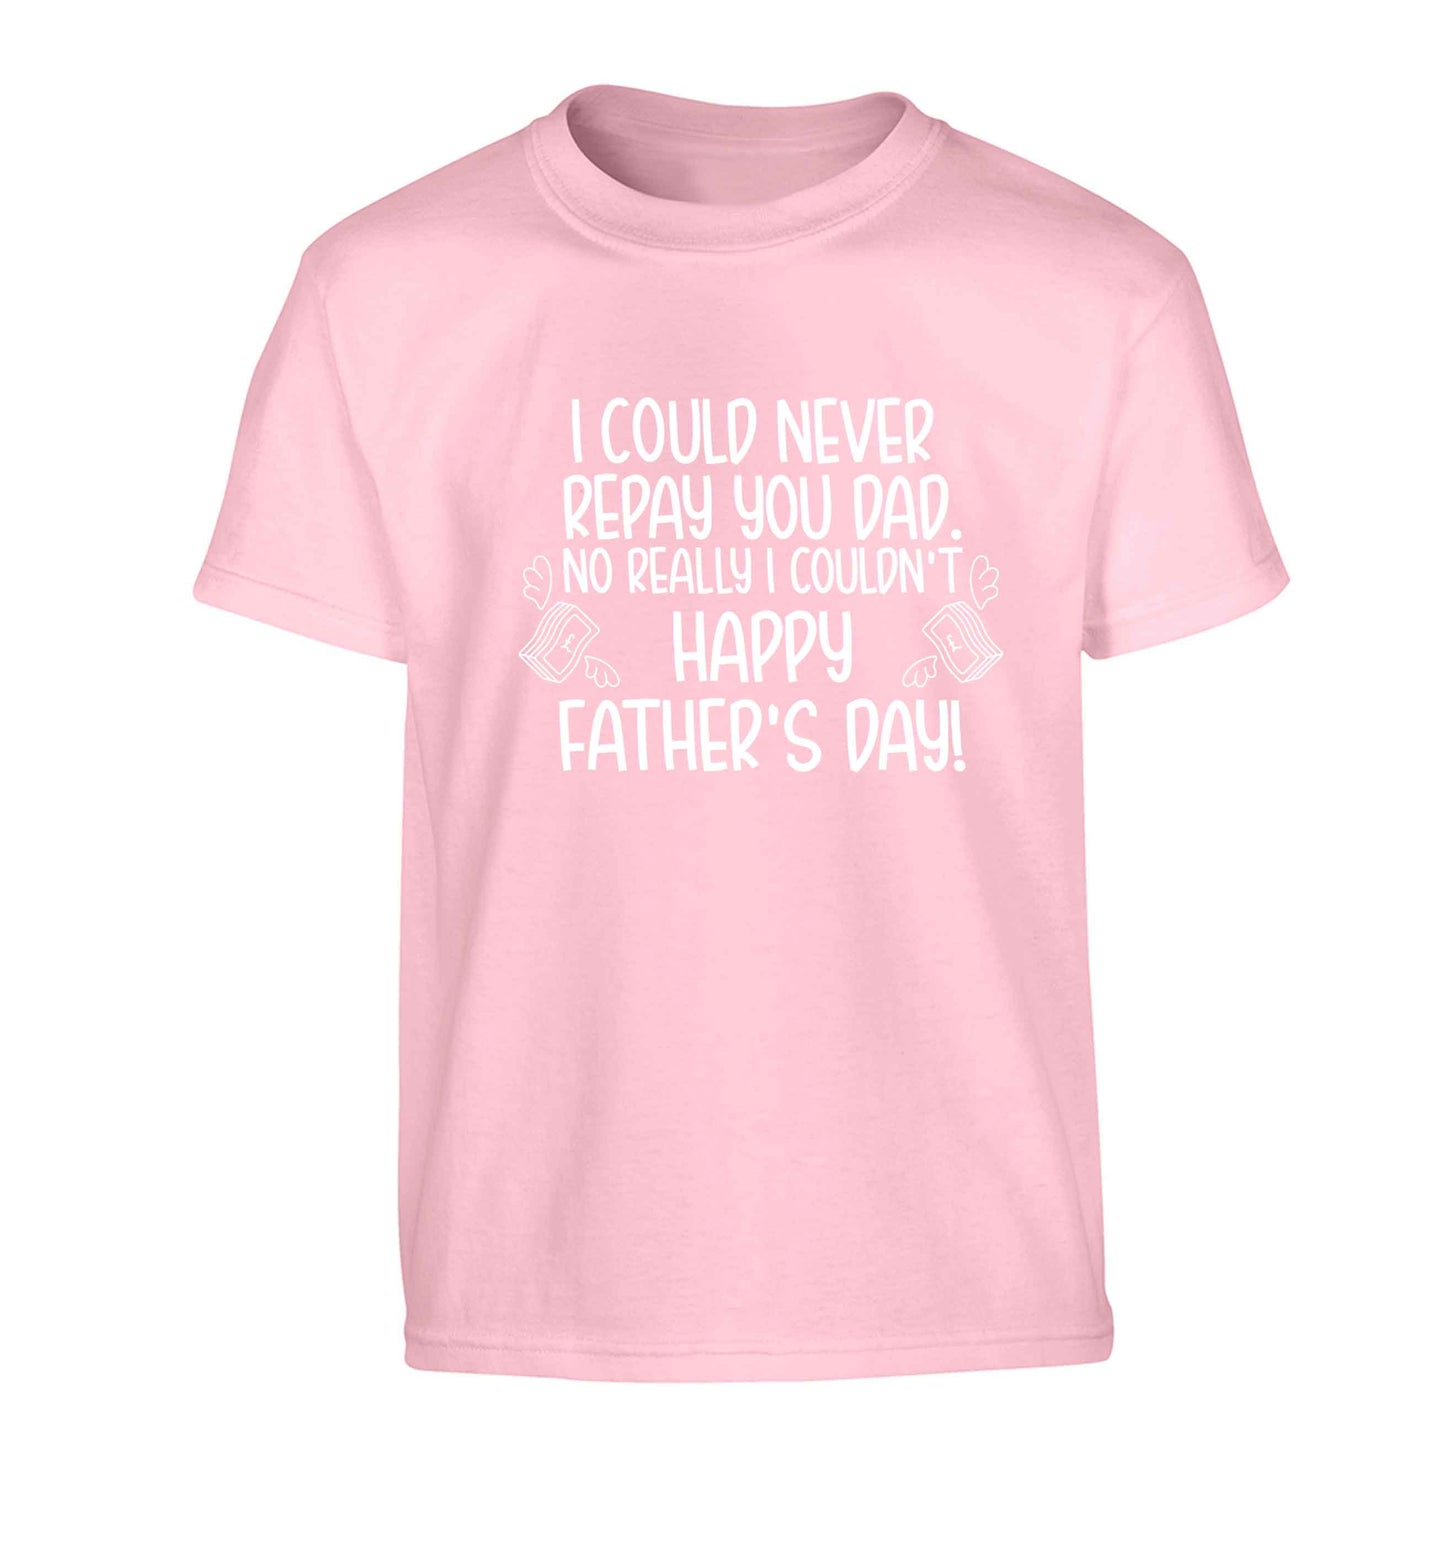 I could never repay you dad. No I really couldn't happy Father's day! Children's light pink Tshirt 12-13 Years